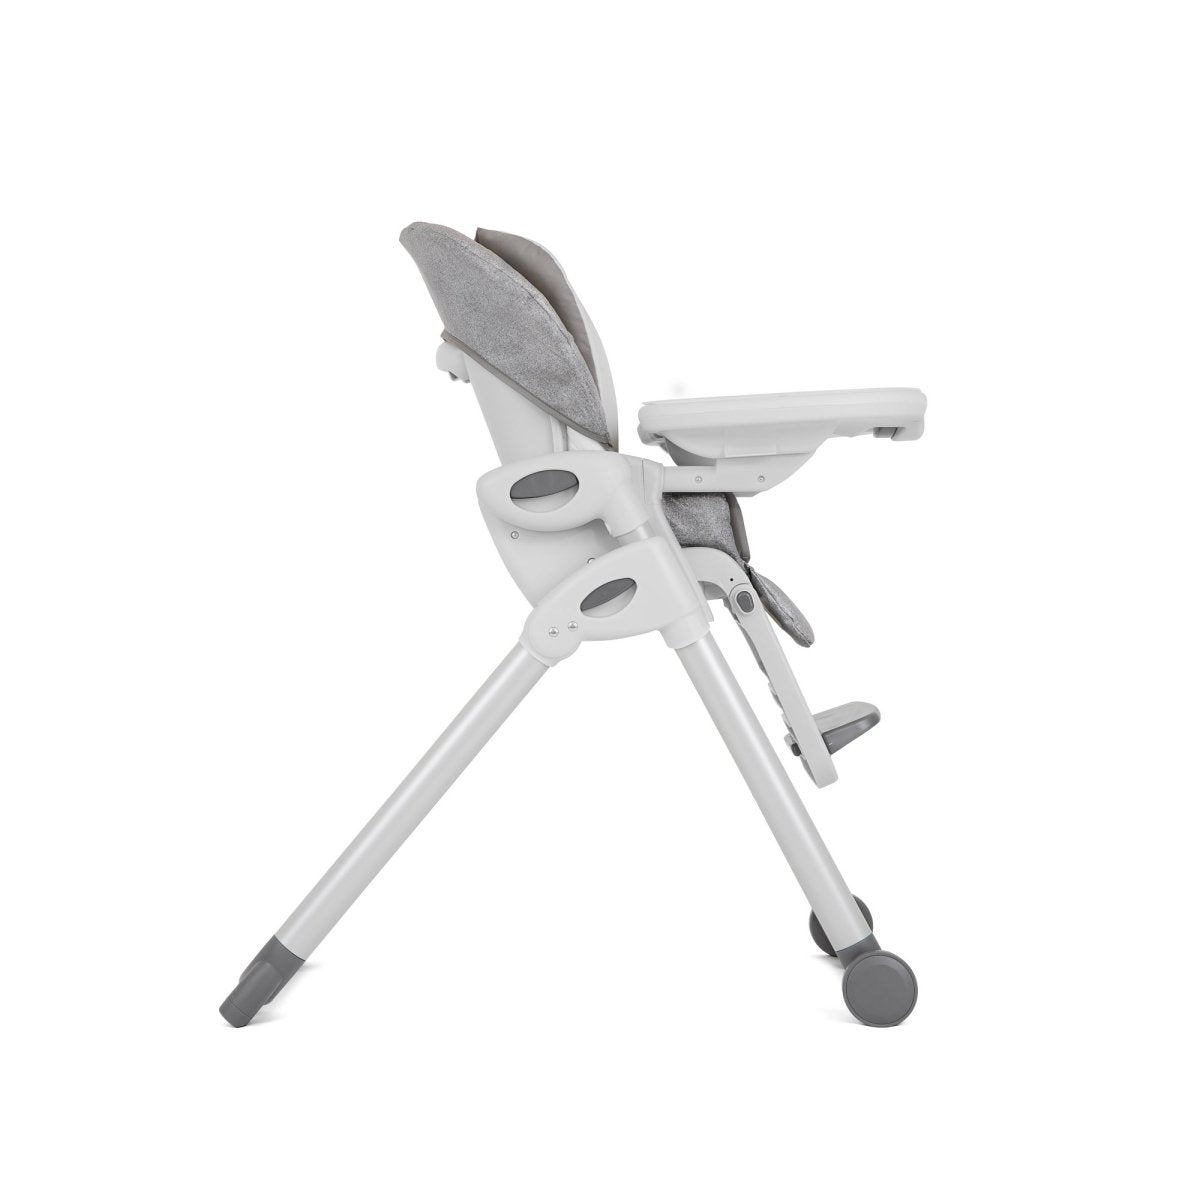 Joie High Chair Mimzy Recline Elephant Duo Birth to 15 Kgs - H1013DAELD000